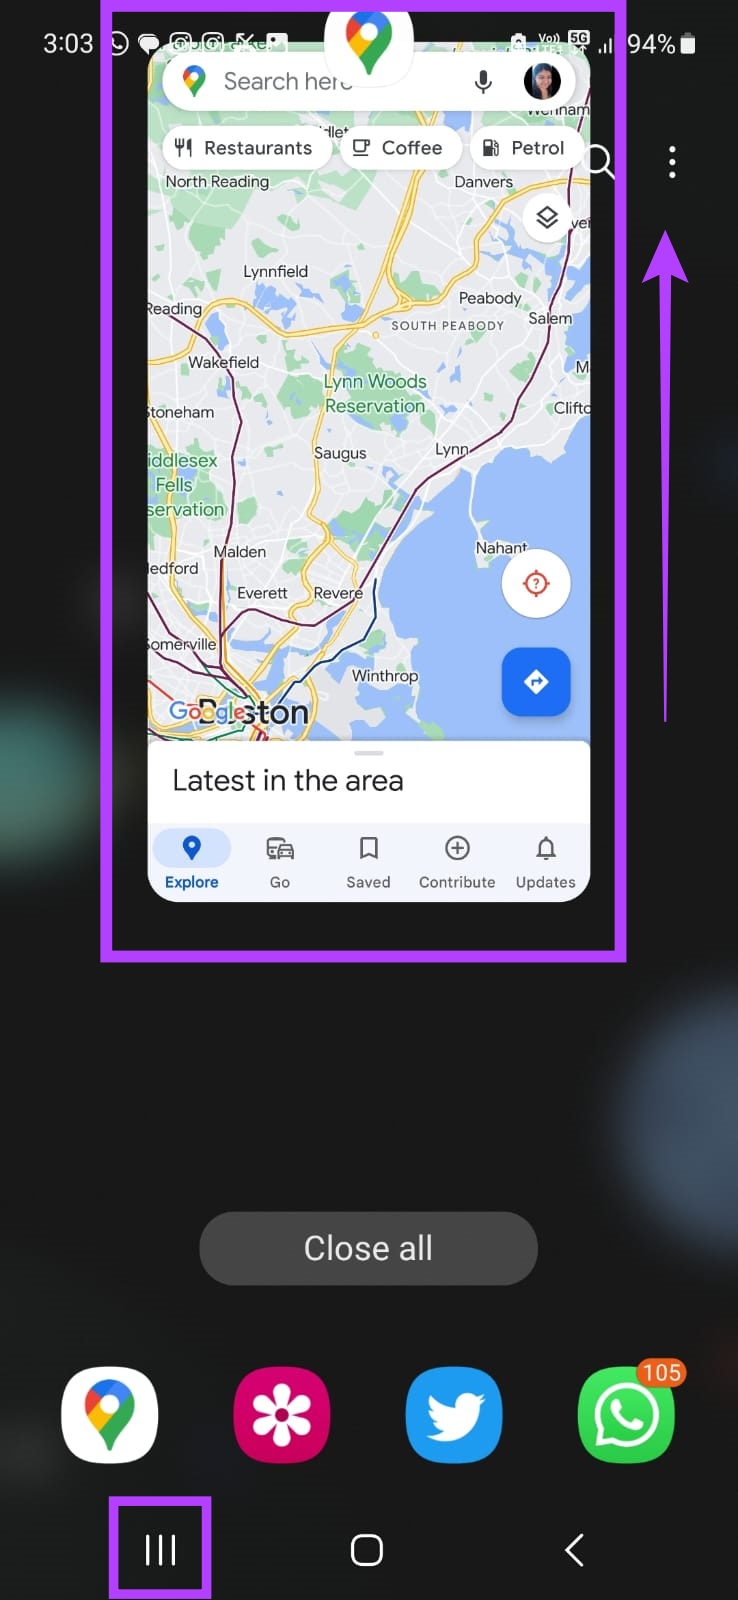 Hold the Google Maps app and swipe up